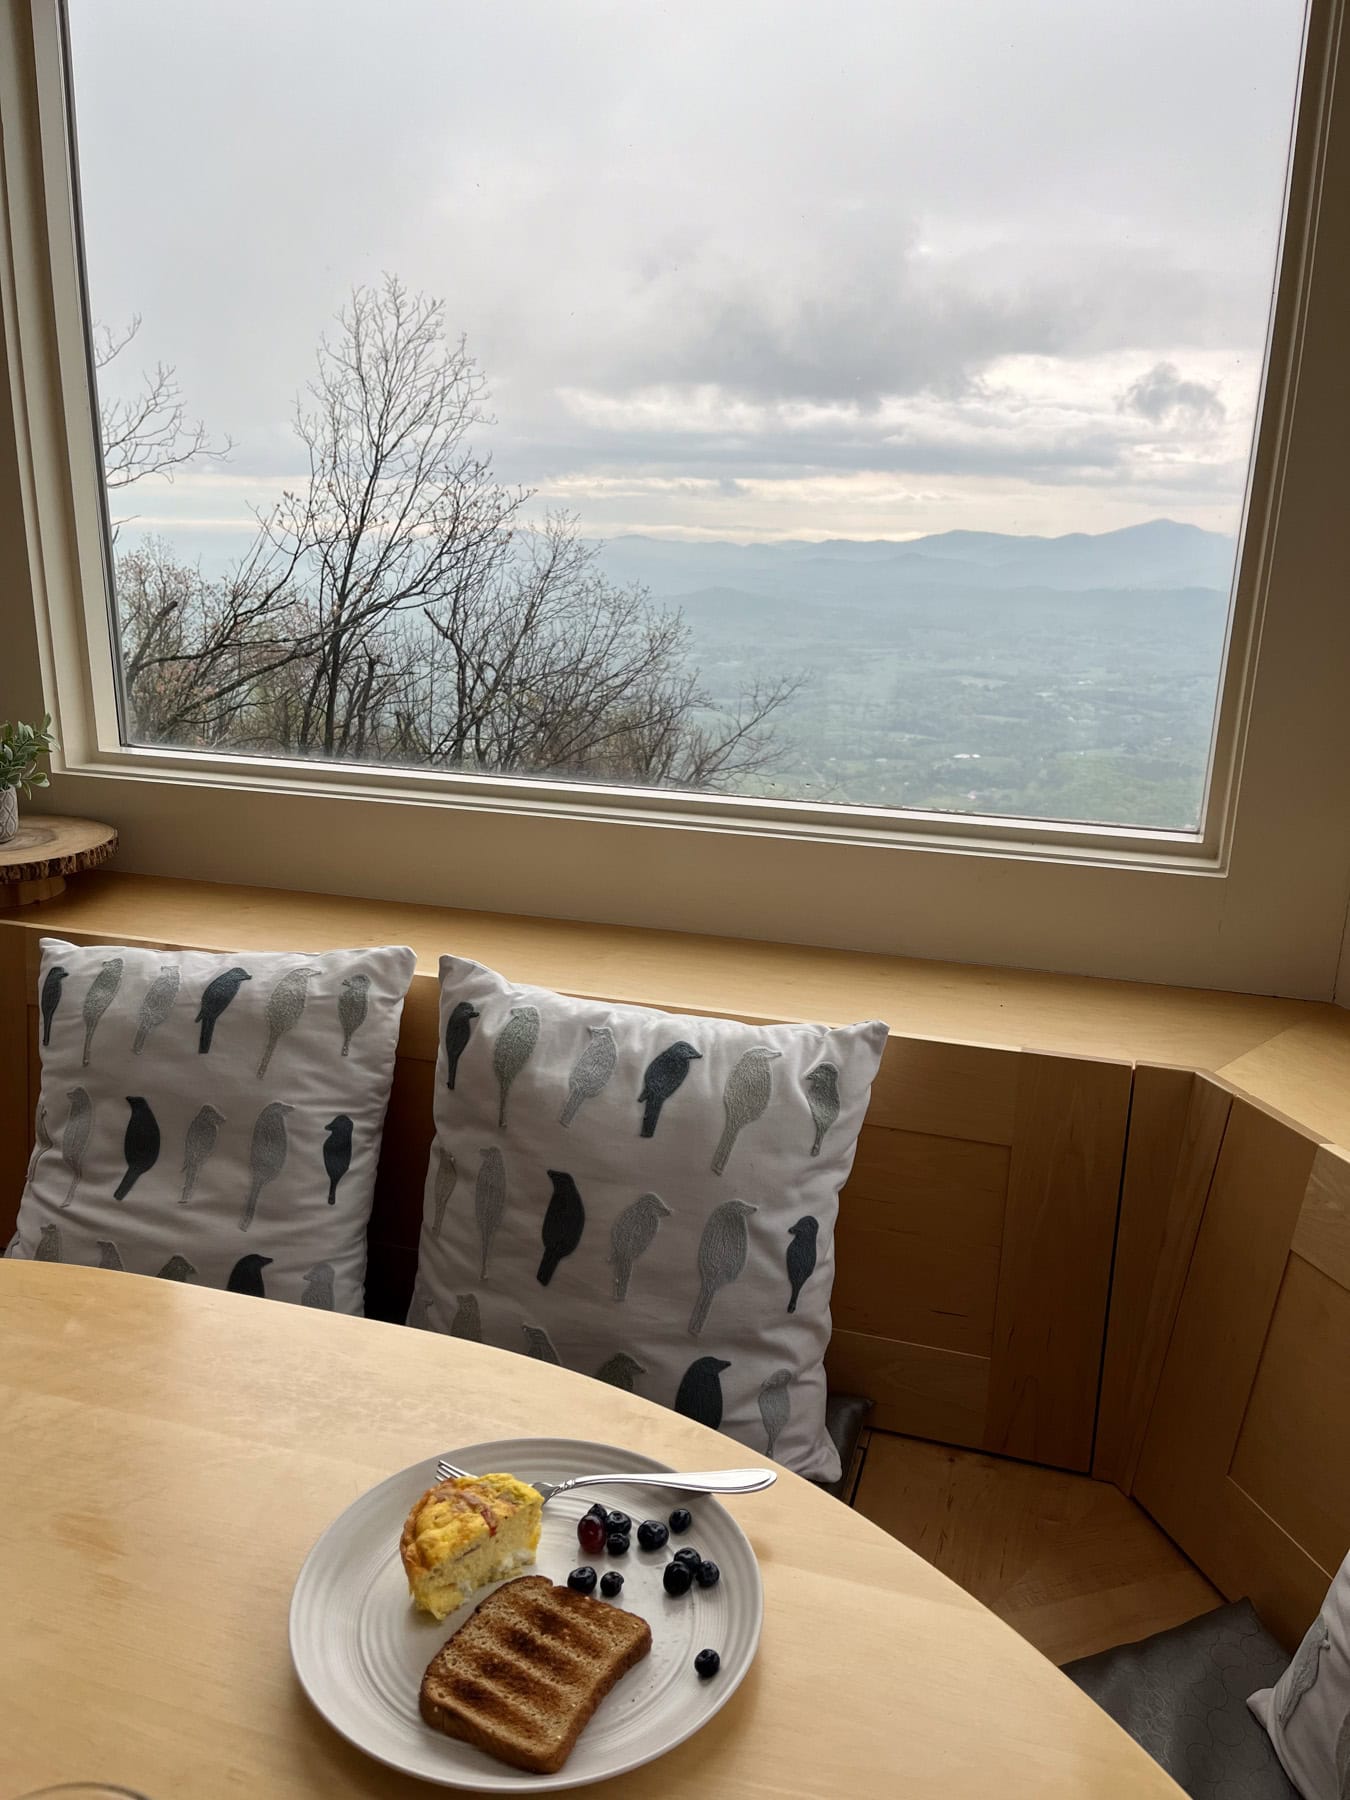 breakfast with a view of the shenandoah mountains